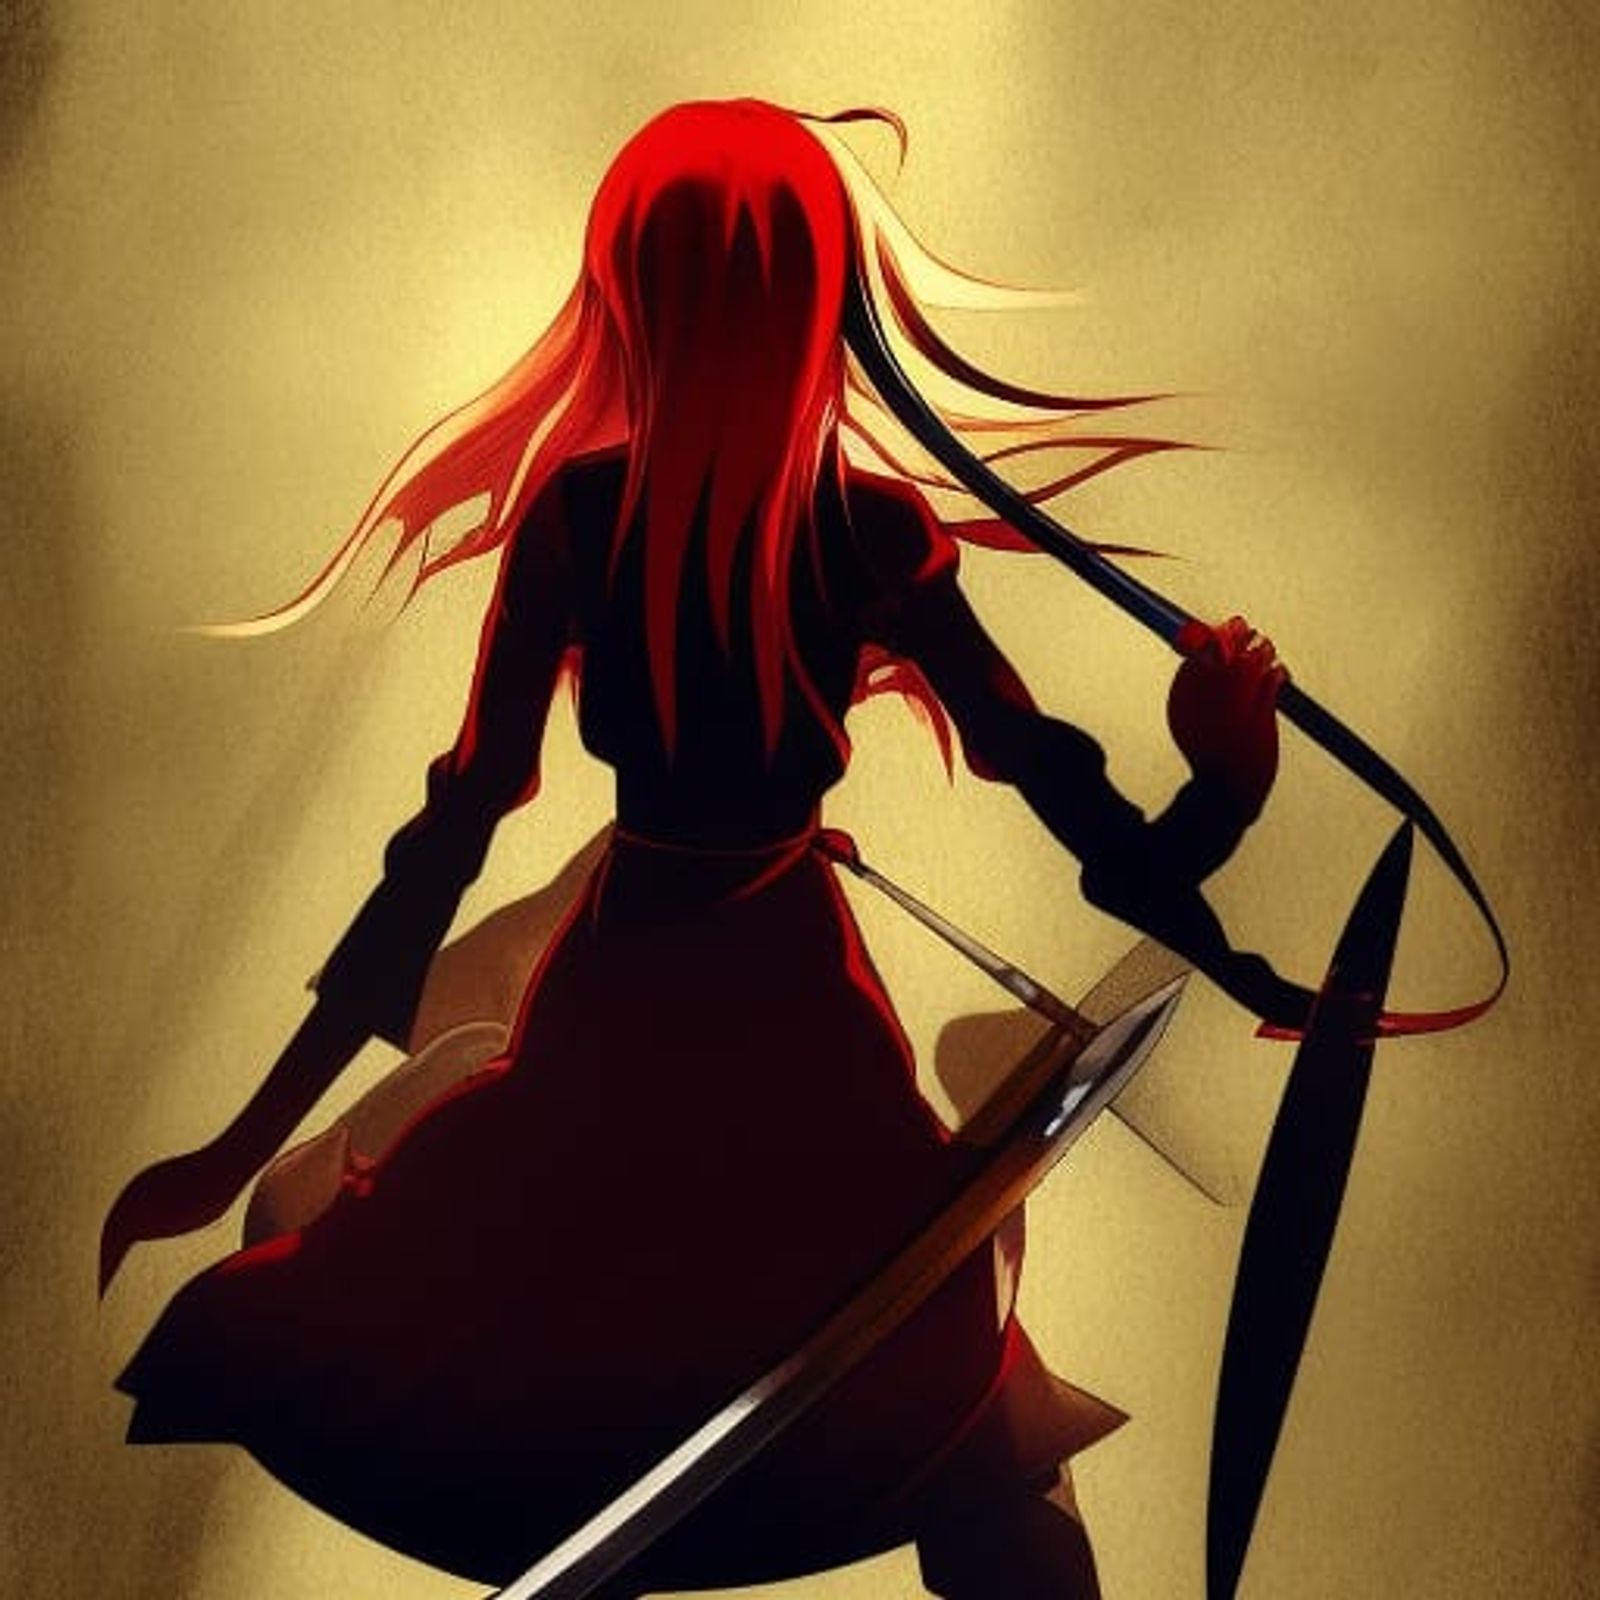 anime girl with sword and red hair